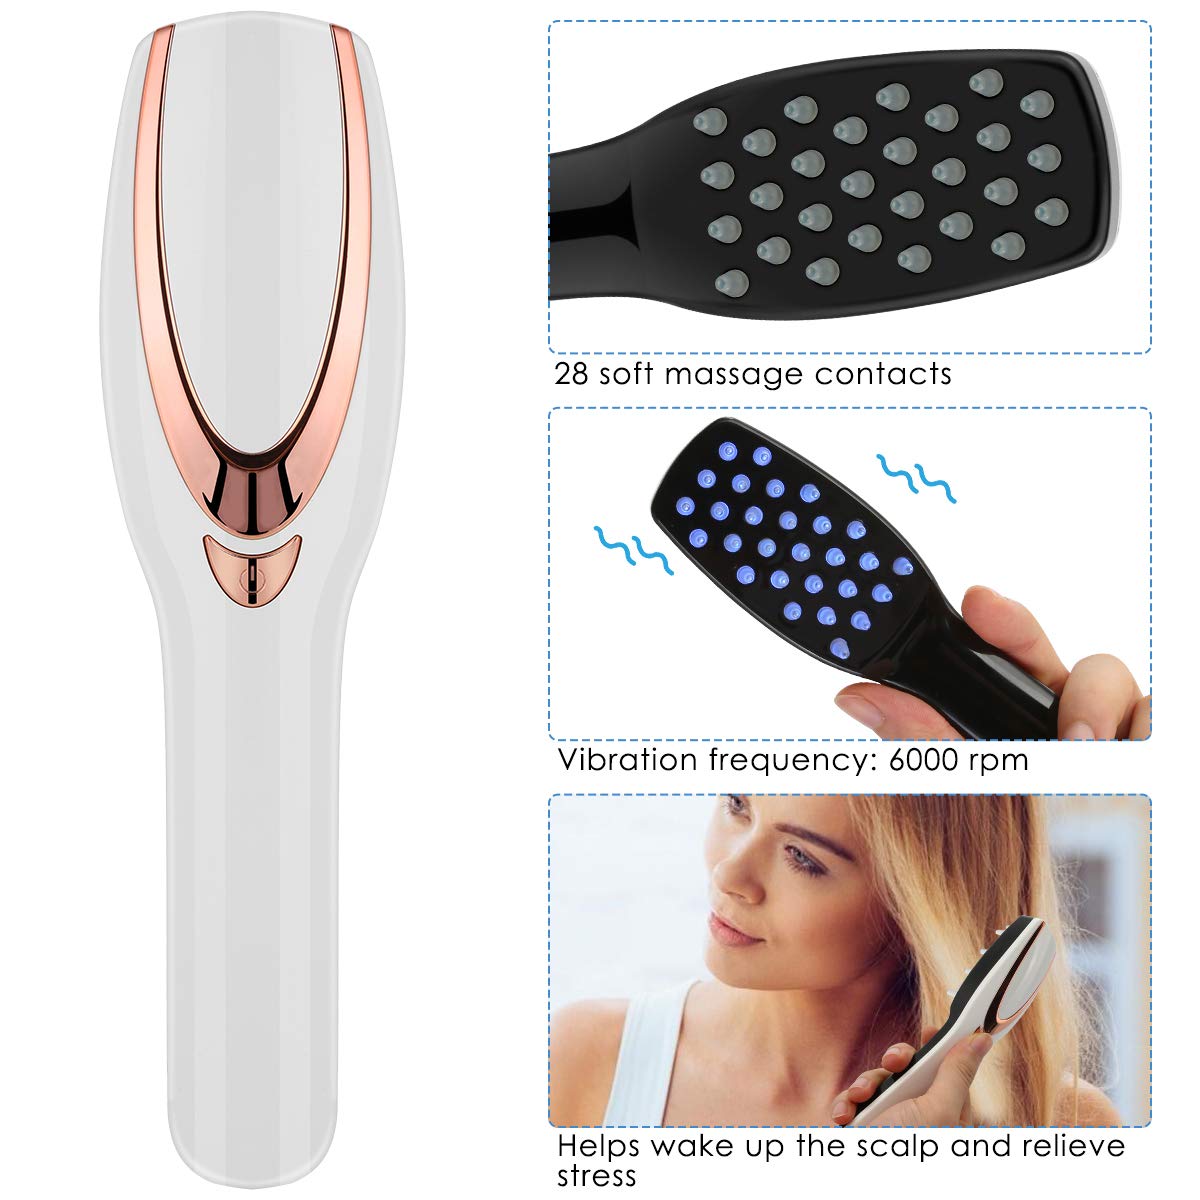 Peroptimist Phototherapy Hair Regrowth Brush, Scalp Massager Comb for Hair Growth, Anti Hair Loss Head Care Electric Massage Comb Brush with USB Rechargeable - image 2 of 8